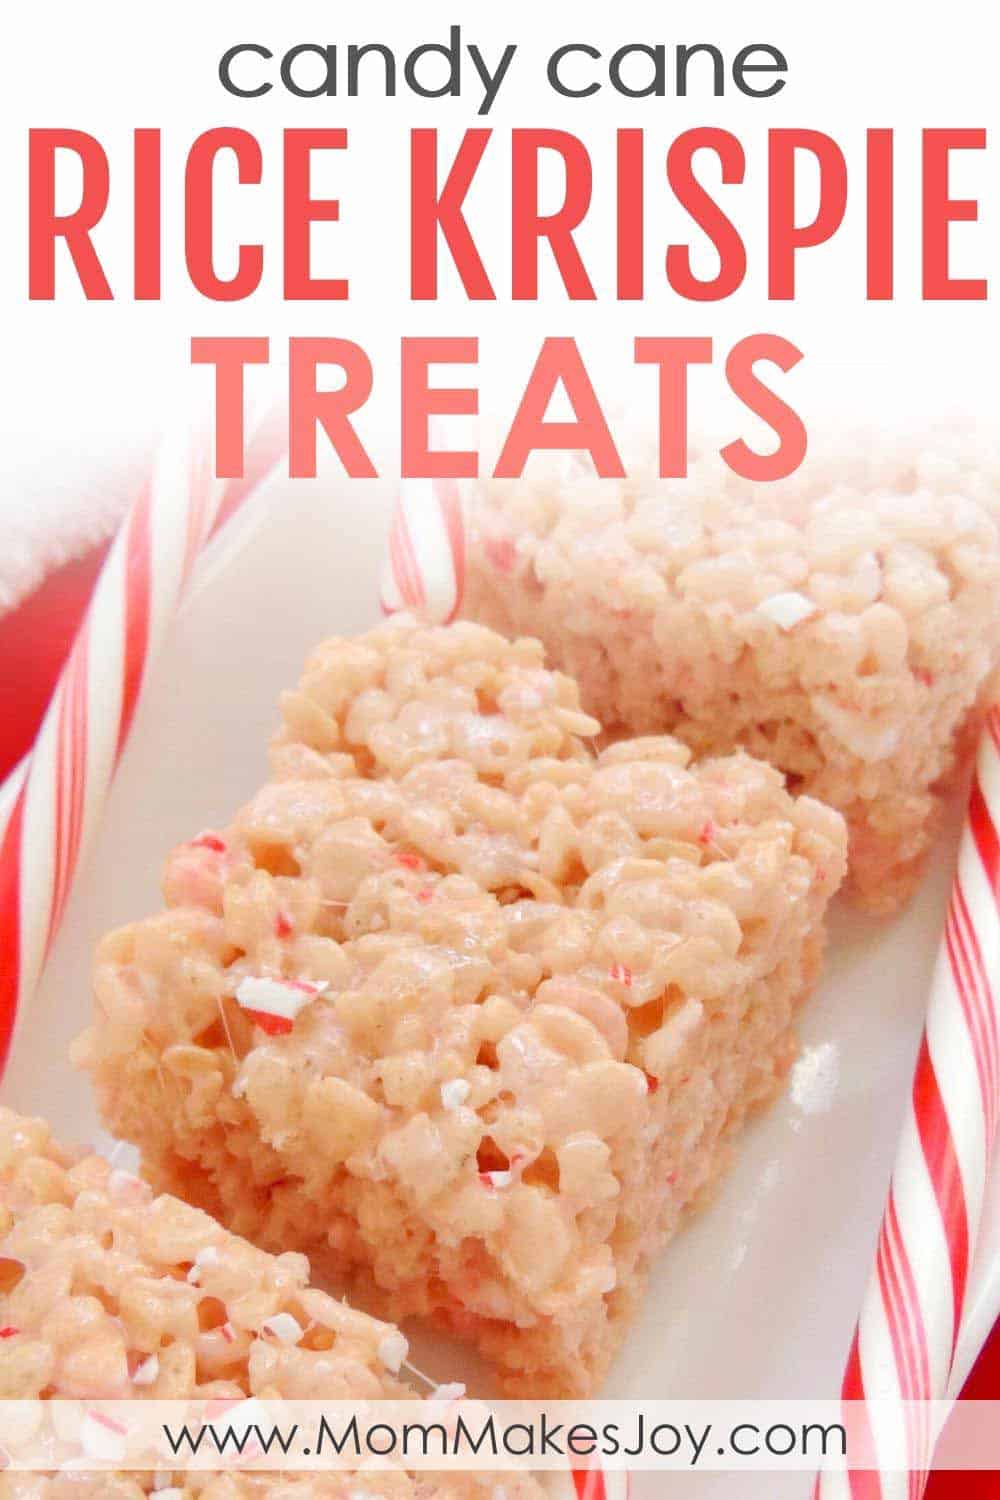 How to make Candy Cane Rice Krispie Treats